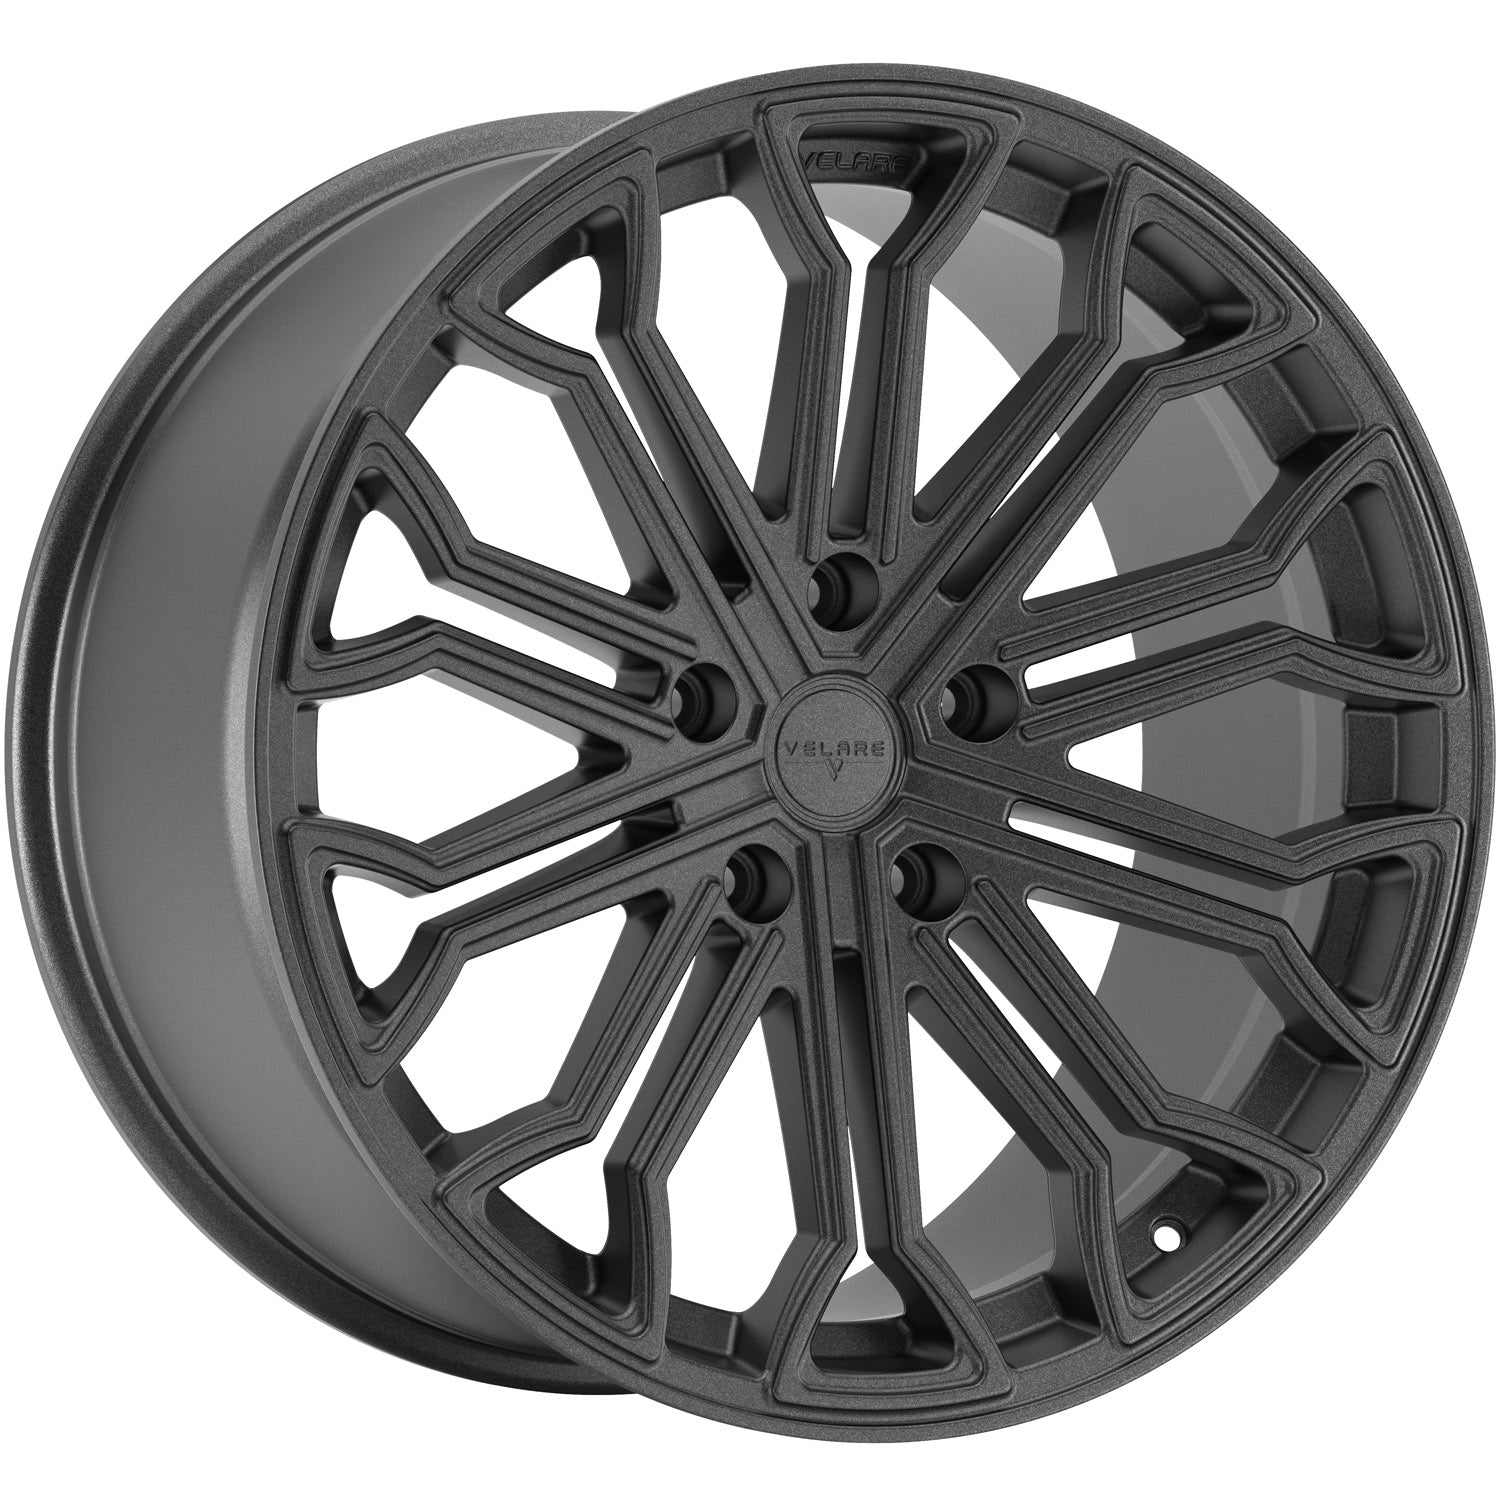 VLR04 Wheel and Tyre Package-Alloy wheels-Velare- DC Leisure